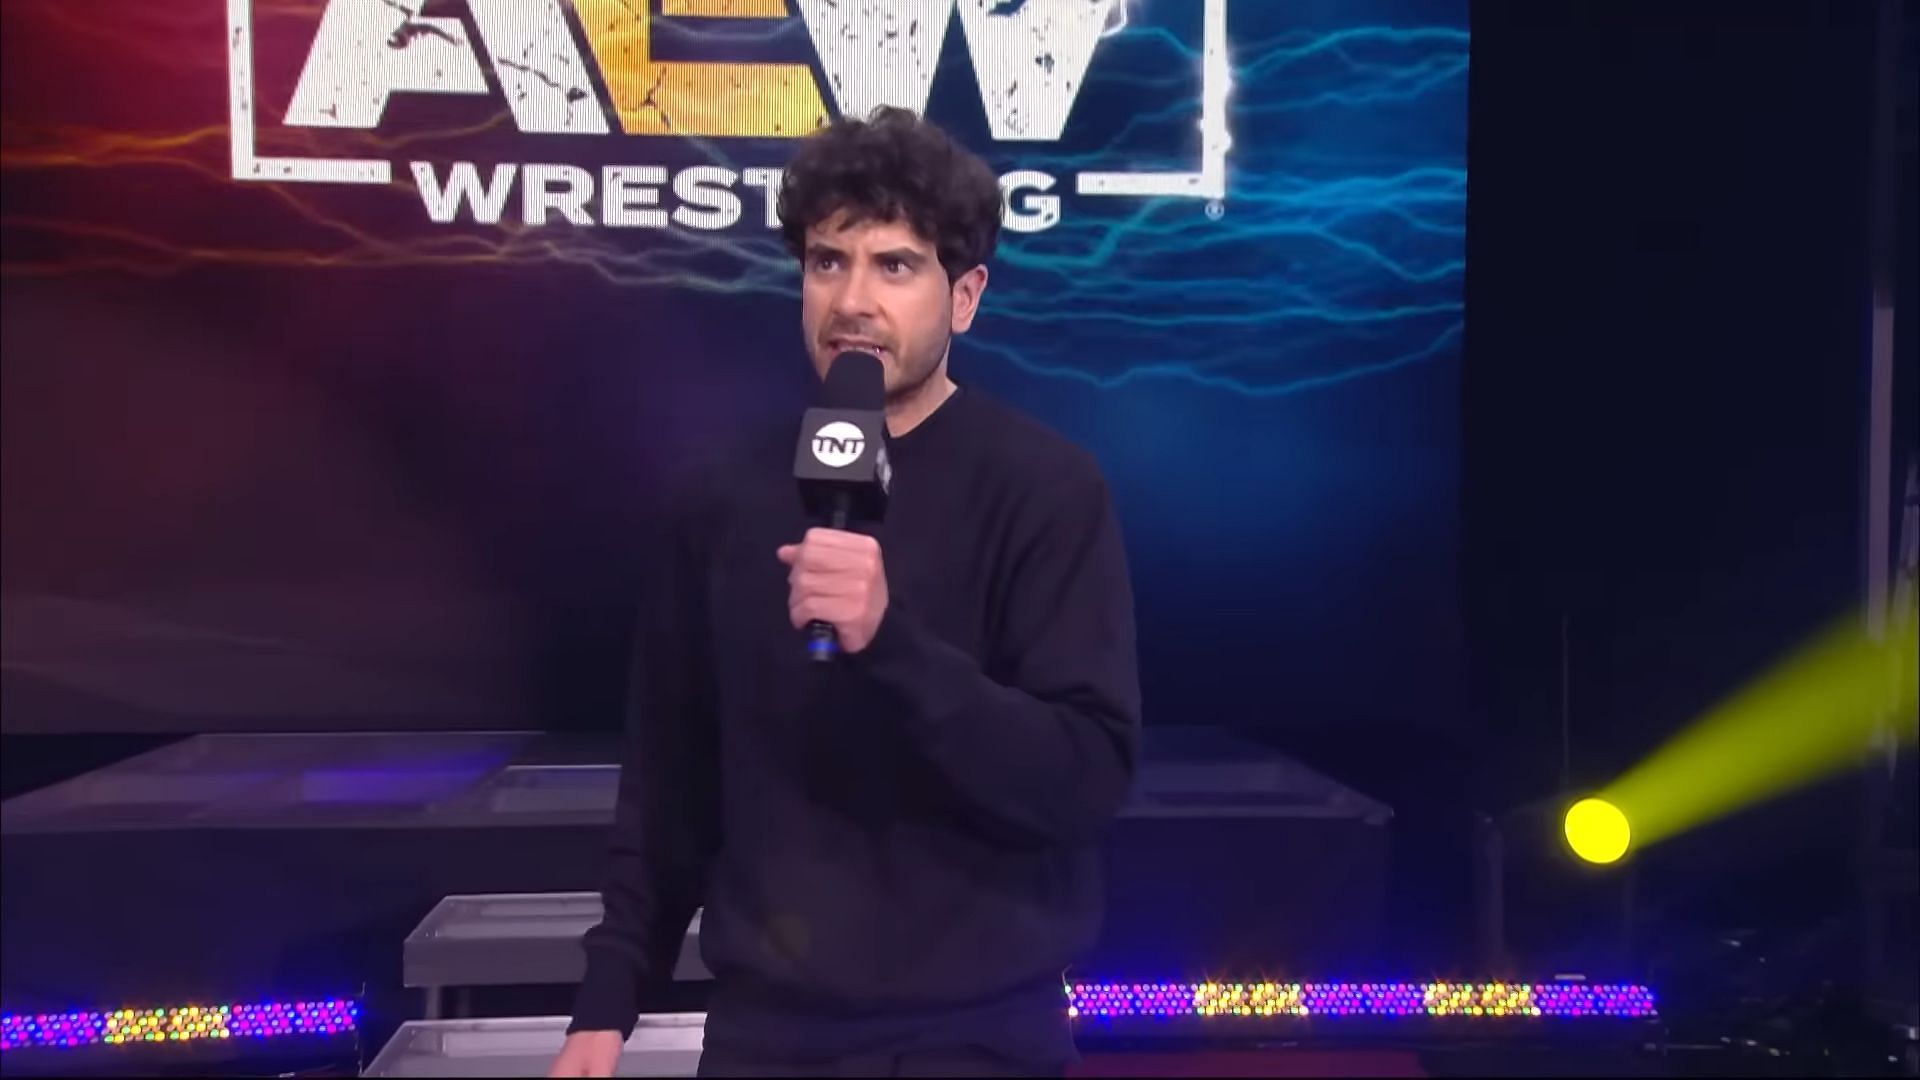 Tony Khan is the CEO of All Elite Wrestling